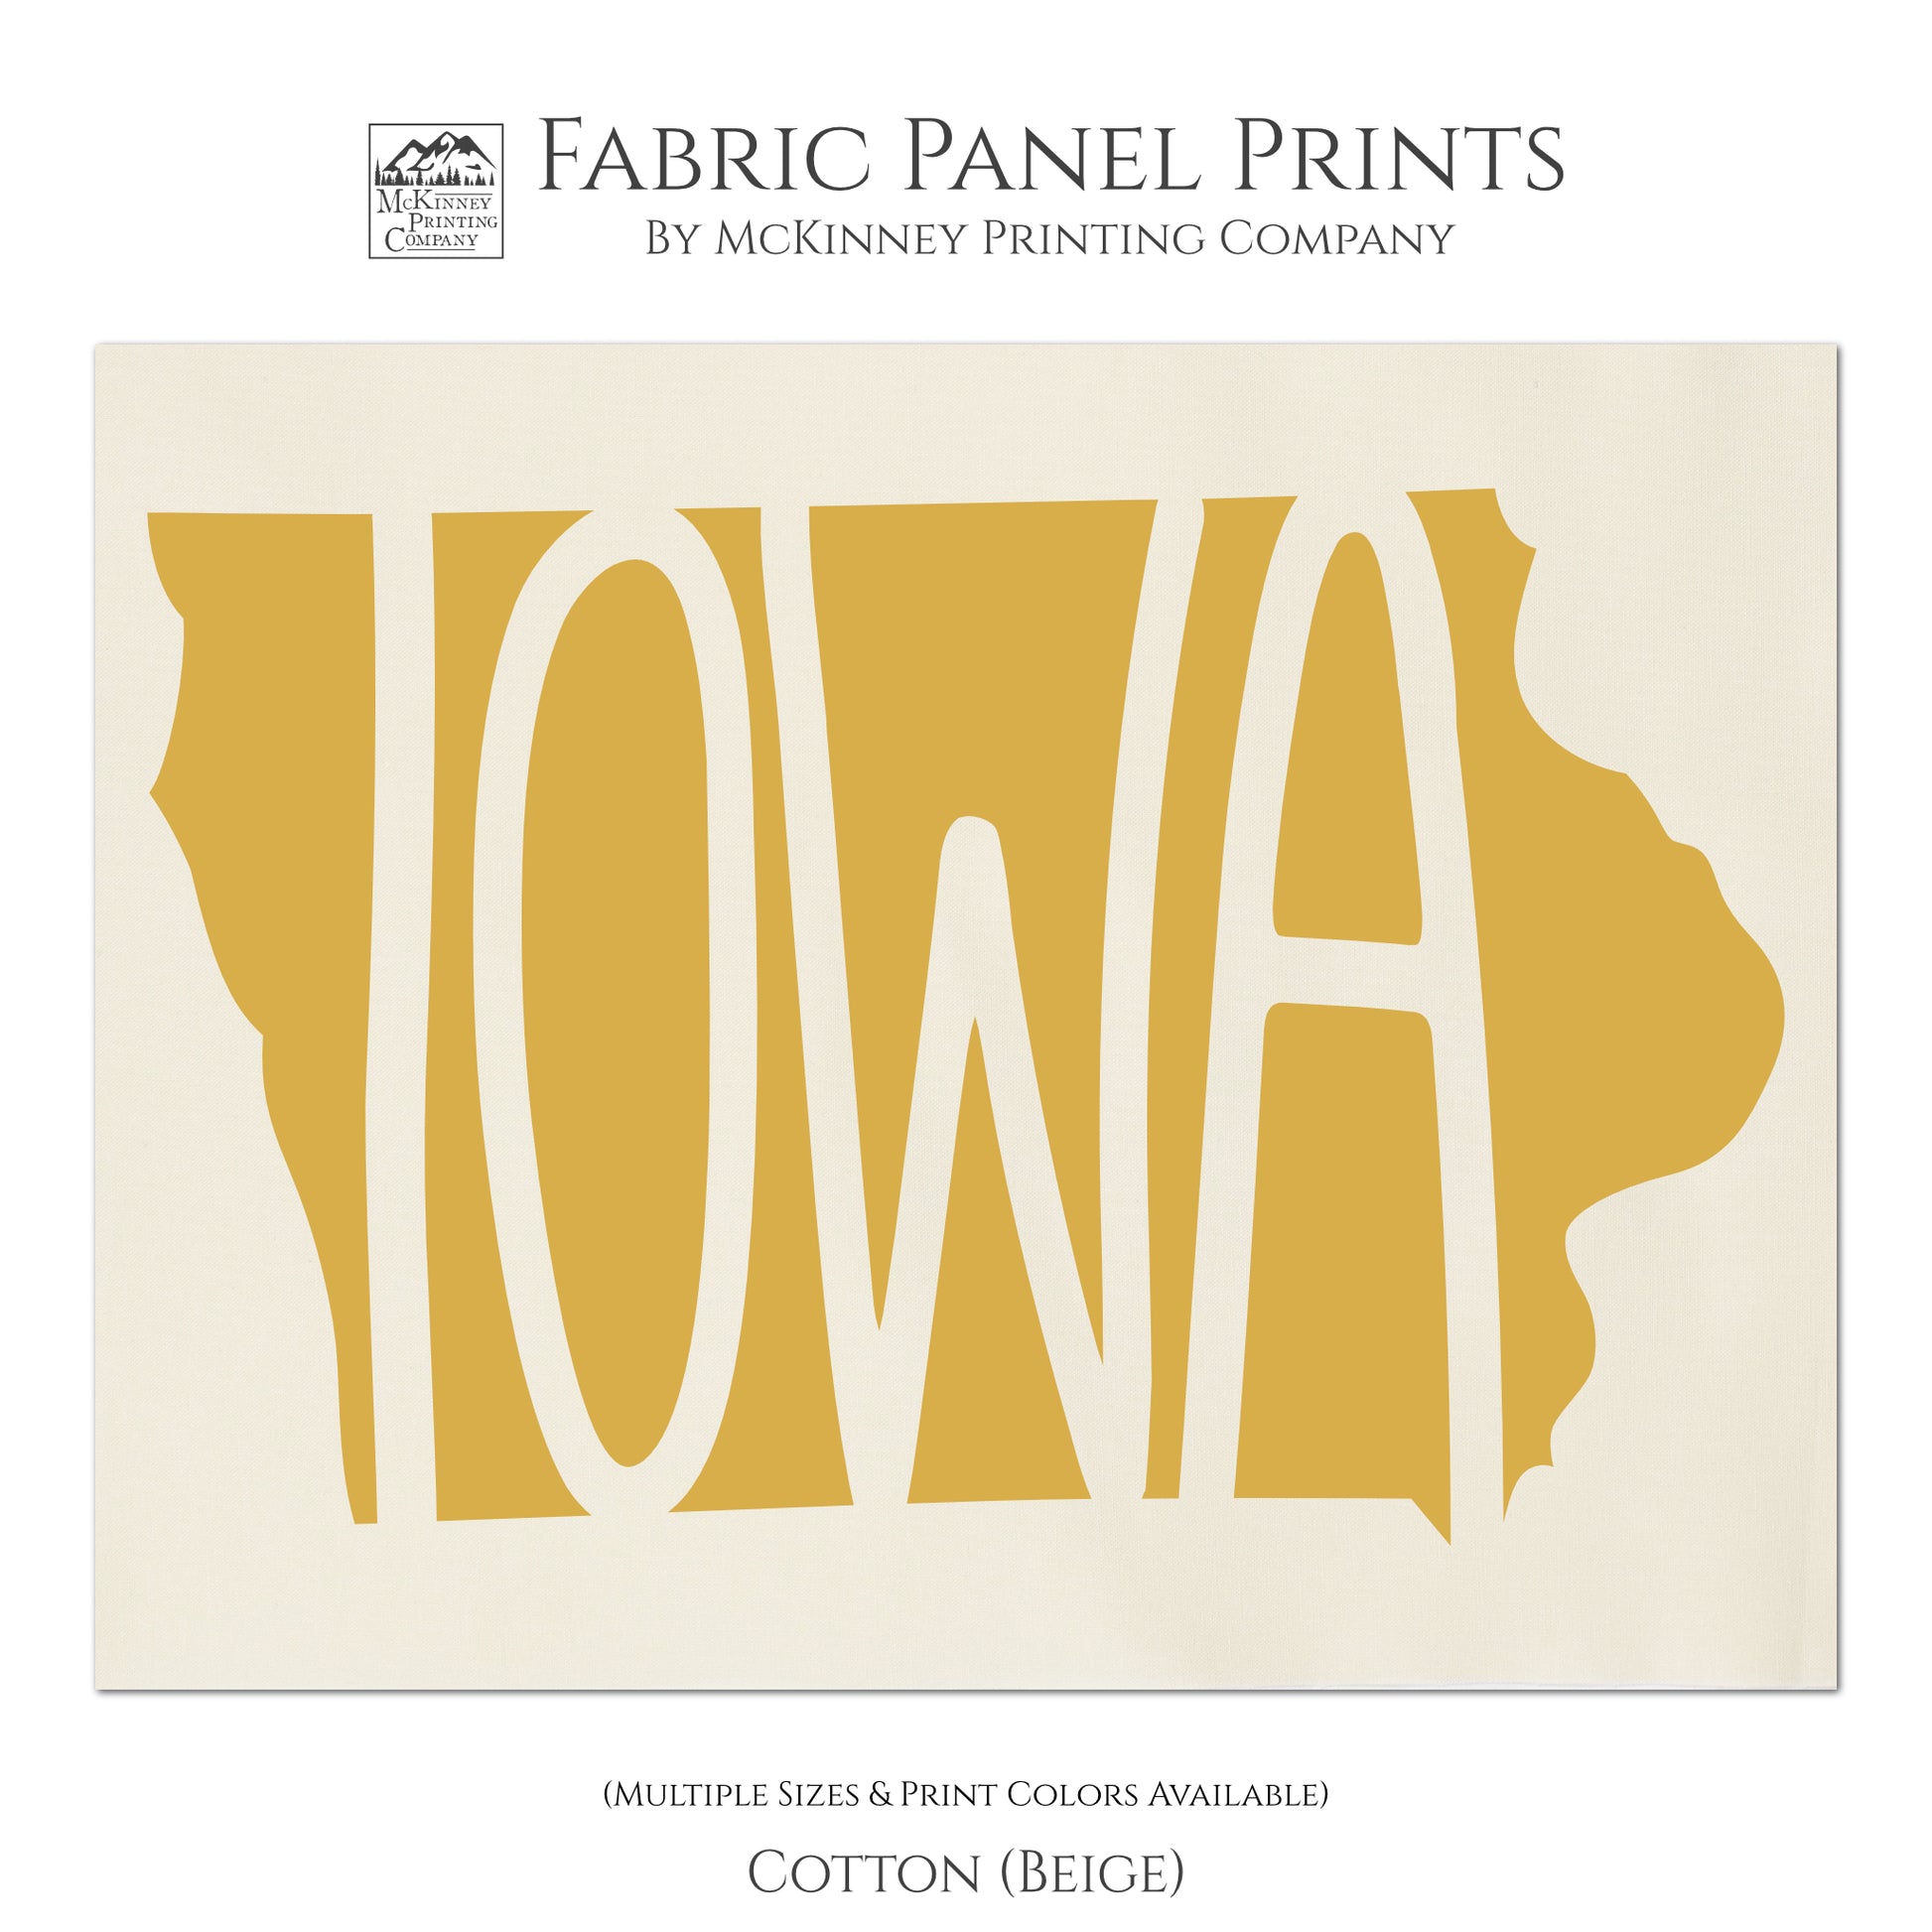 Iowa - Fabric Panel Print, Large | Small Cotton Quilt Block, Craft, State Silhouette, Pillow, Towel, TShirt - Cotton